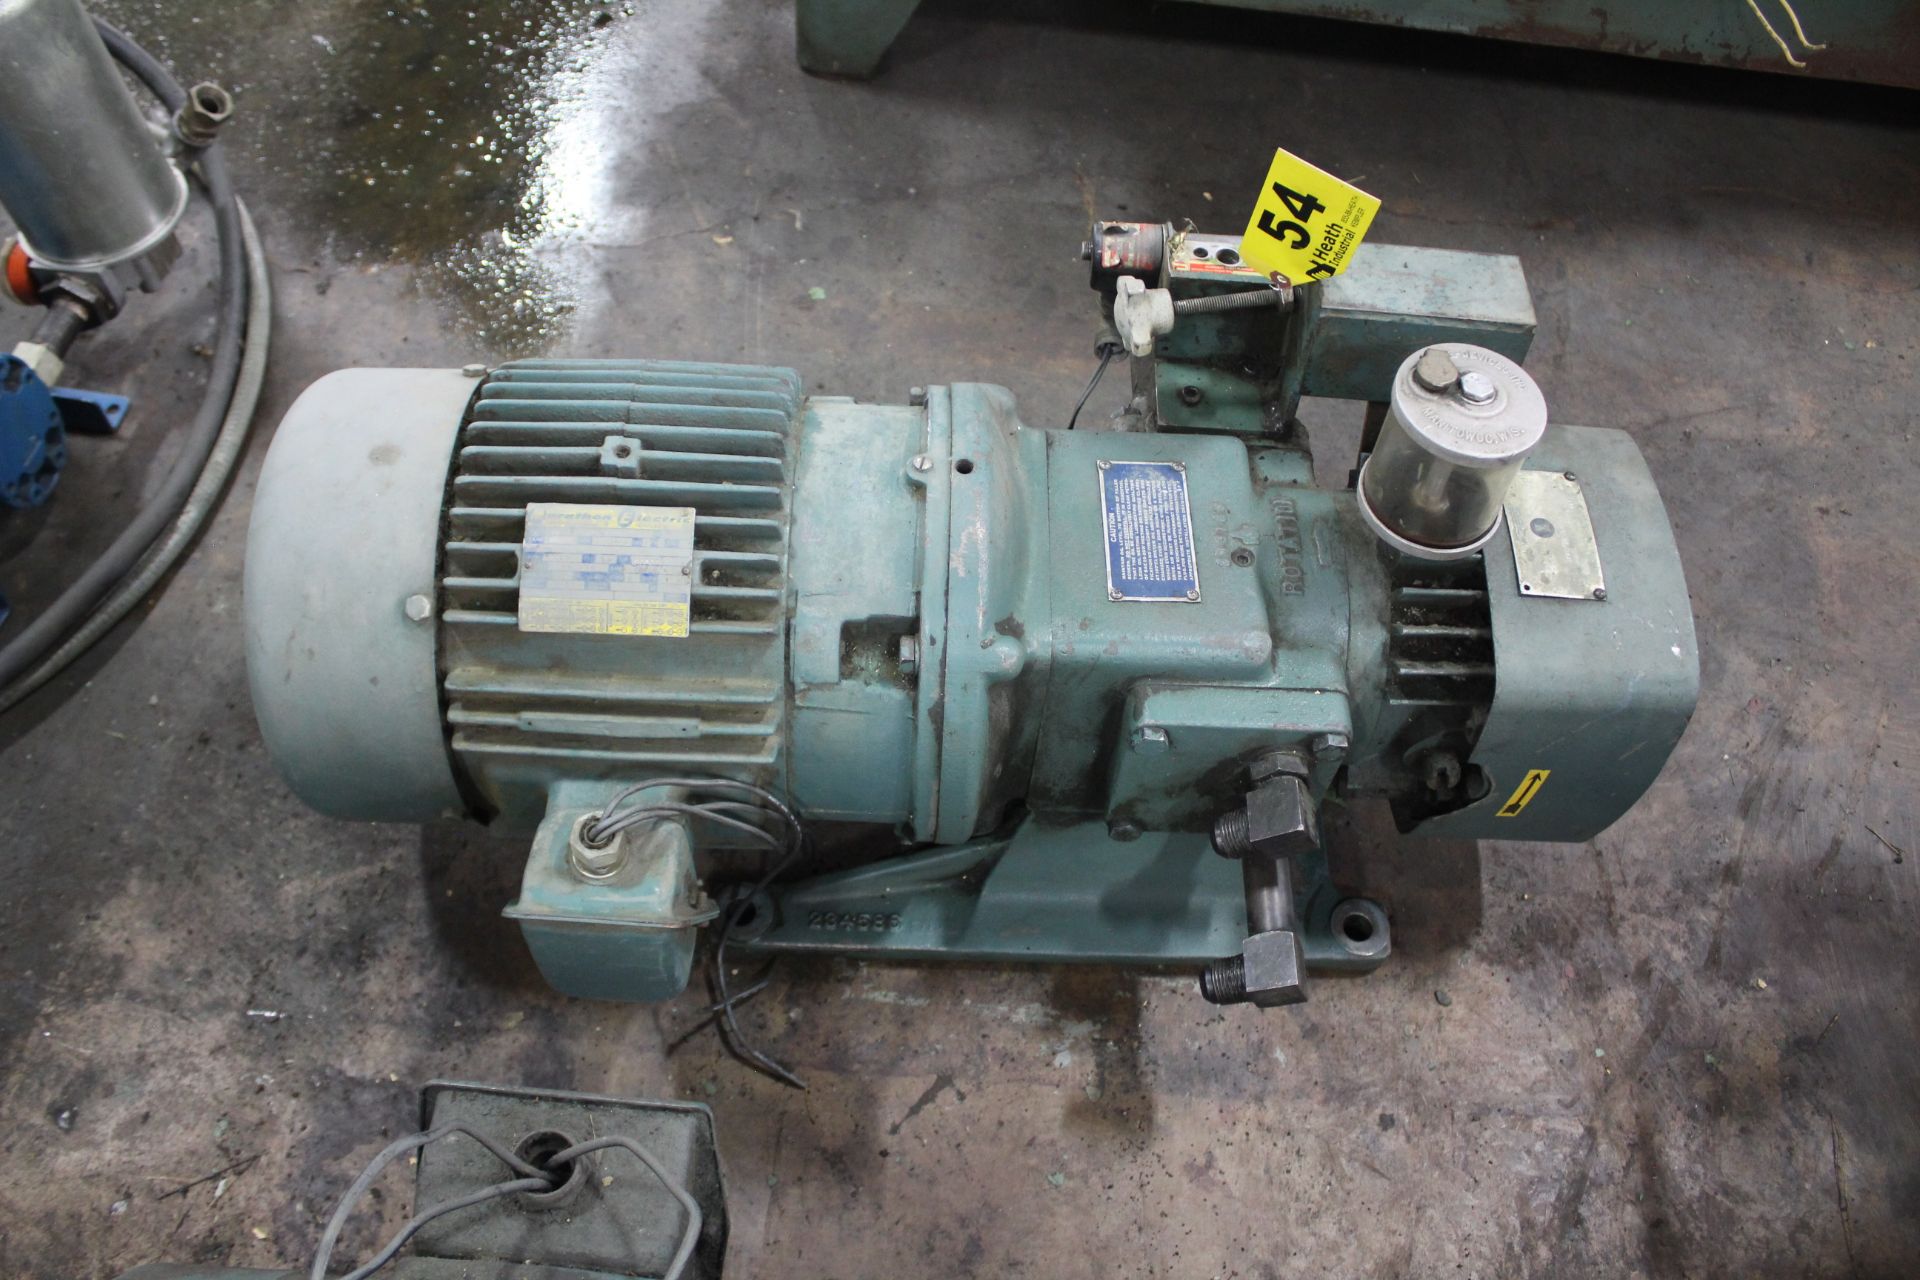 VICKERS HYDRAULIC PUMP, WITH MARATHON ELECTRIC 7-1/2 HP MOTOR, ADJUSTABLE SPEED DRIVE